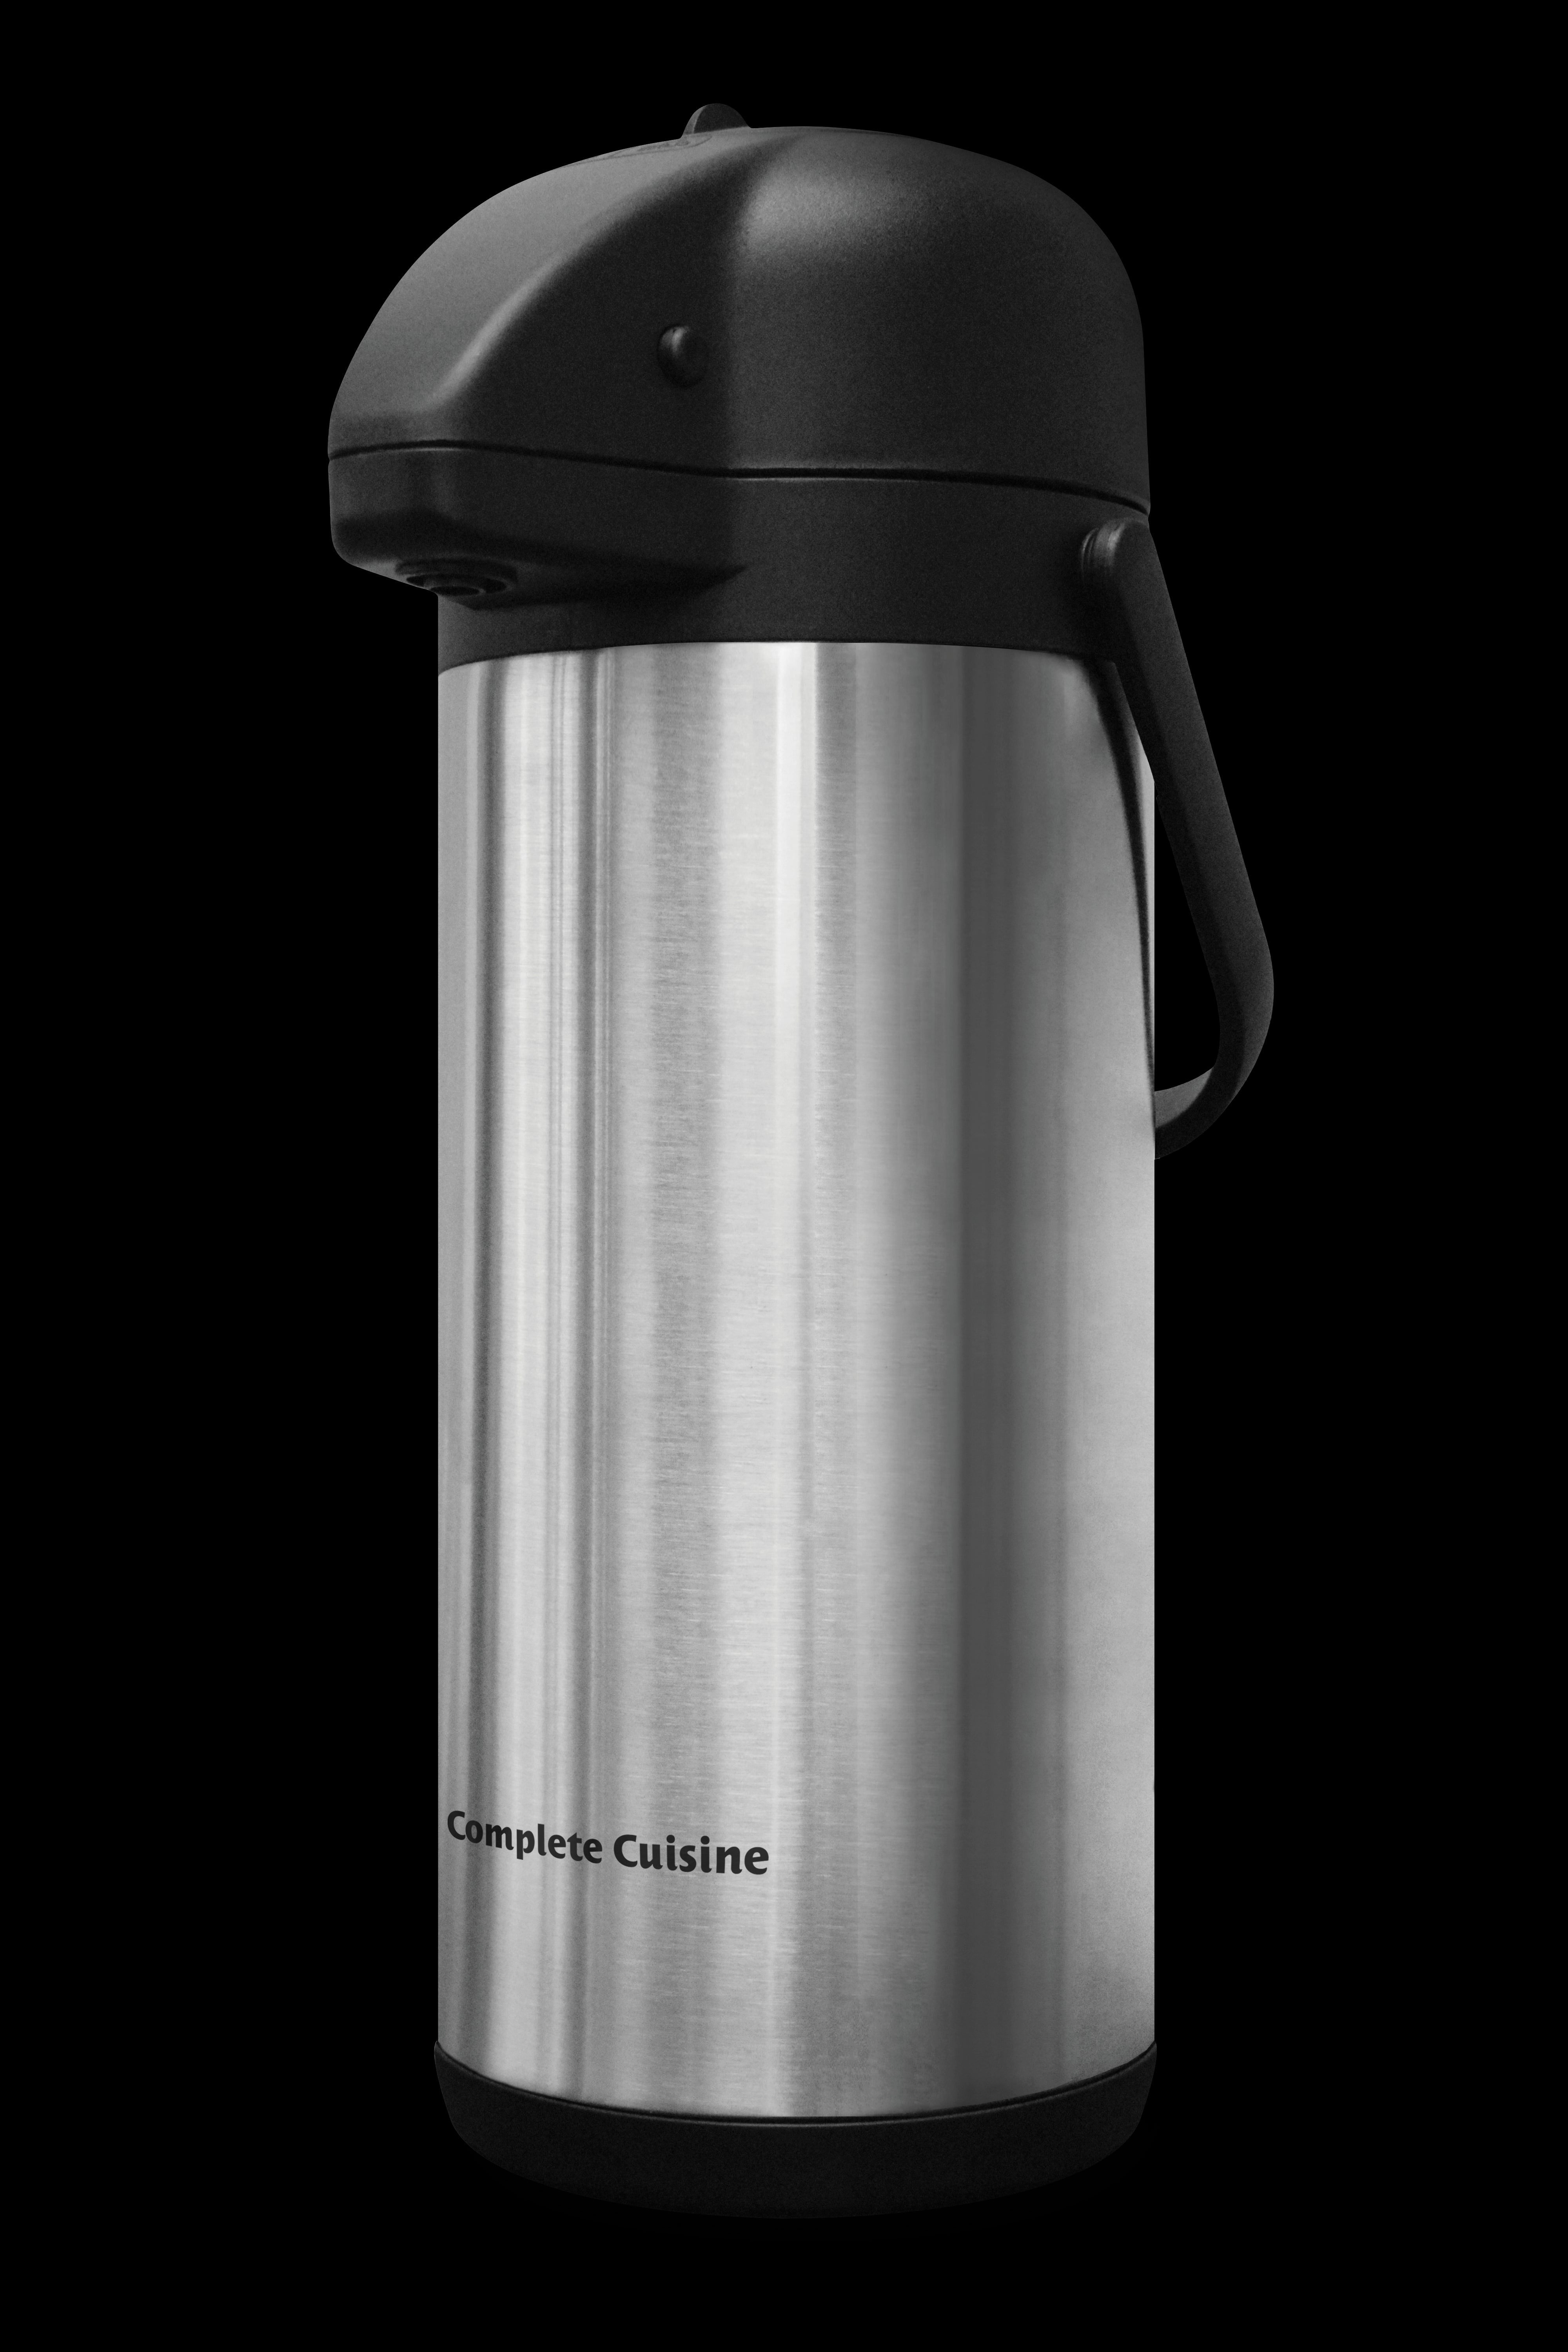 Thermal Carafe 3L Stainless Steel, Hot Water Dispenser for Coffee and Tea, 12 Hour Heat 24 Hour Cold Retention